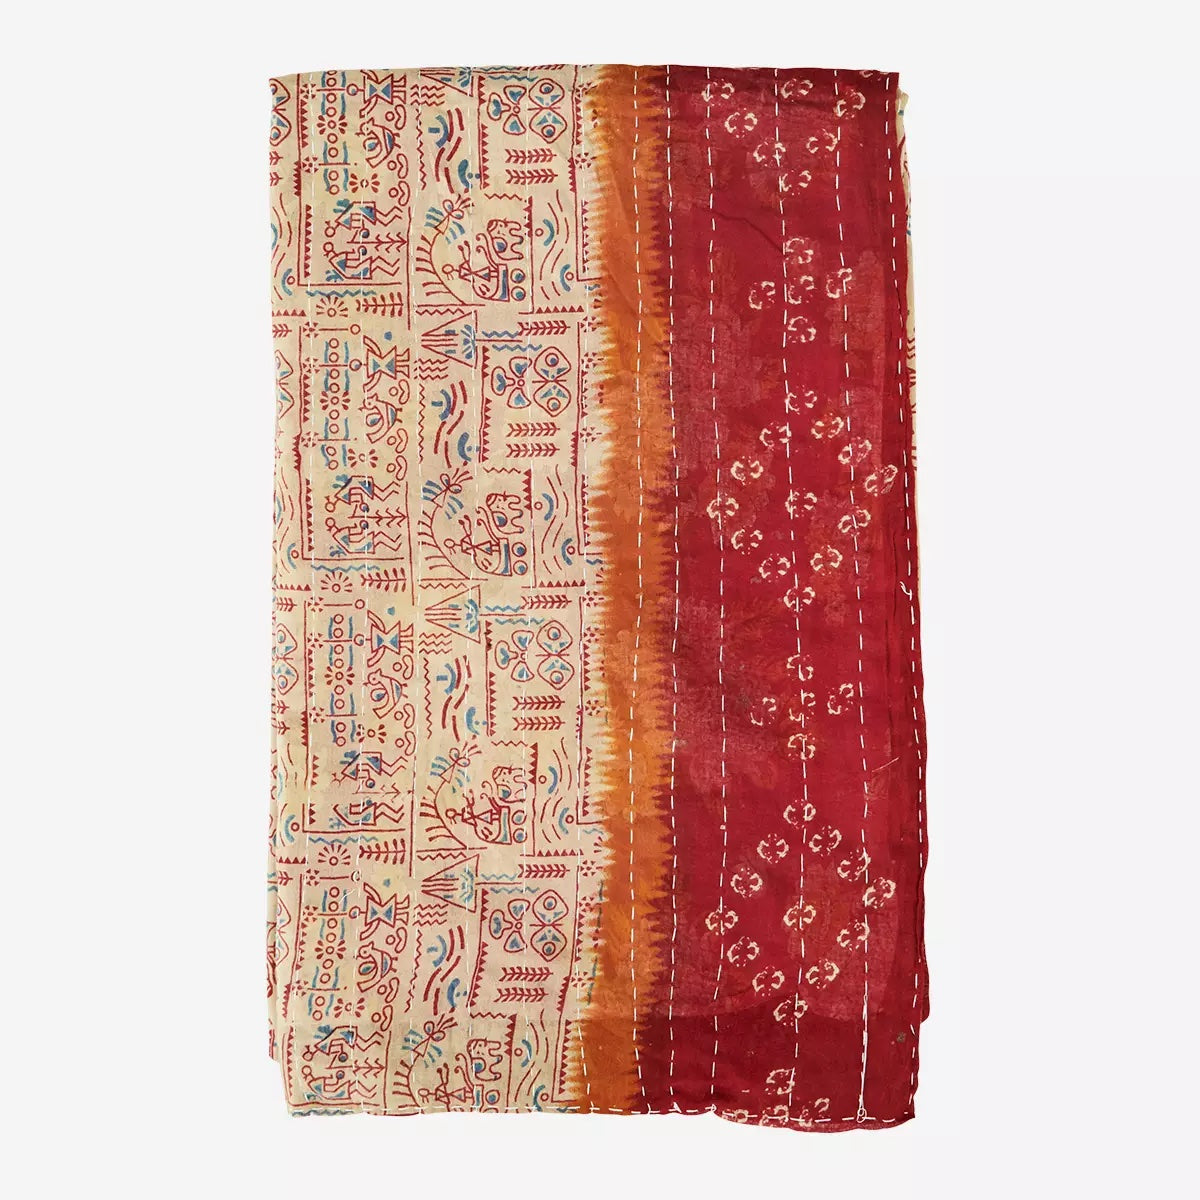 Recycled Kantha Throw 100x200cm - LEEF mode en accessoires